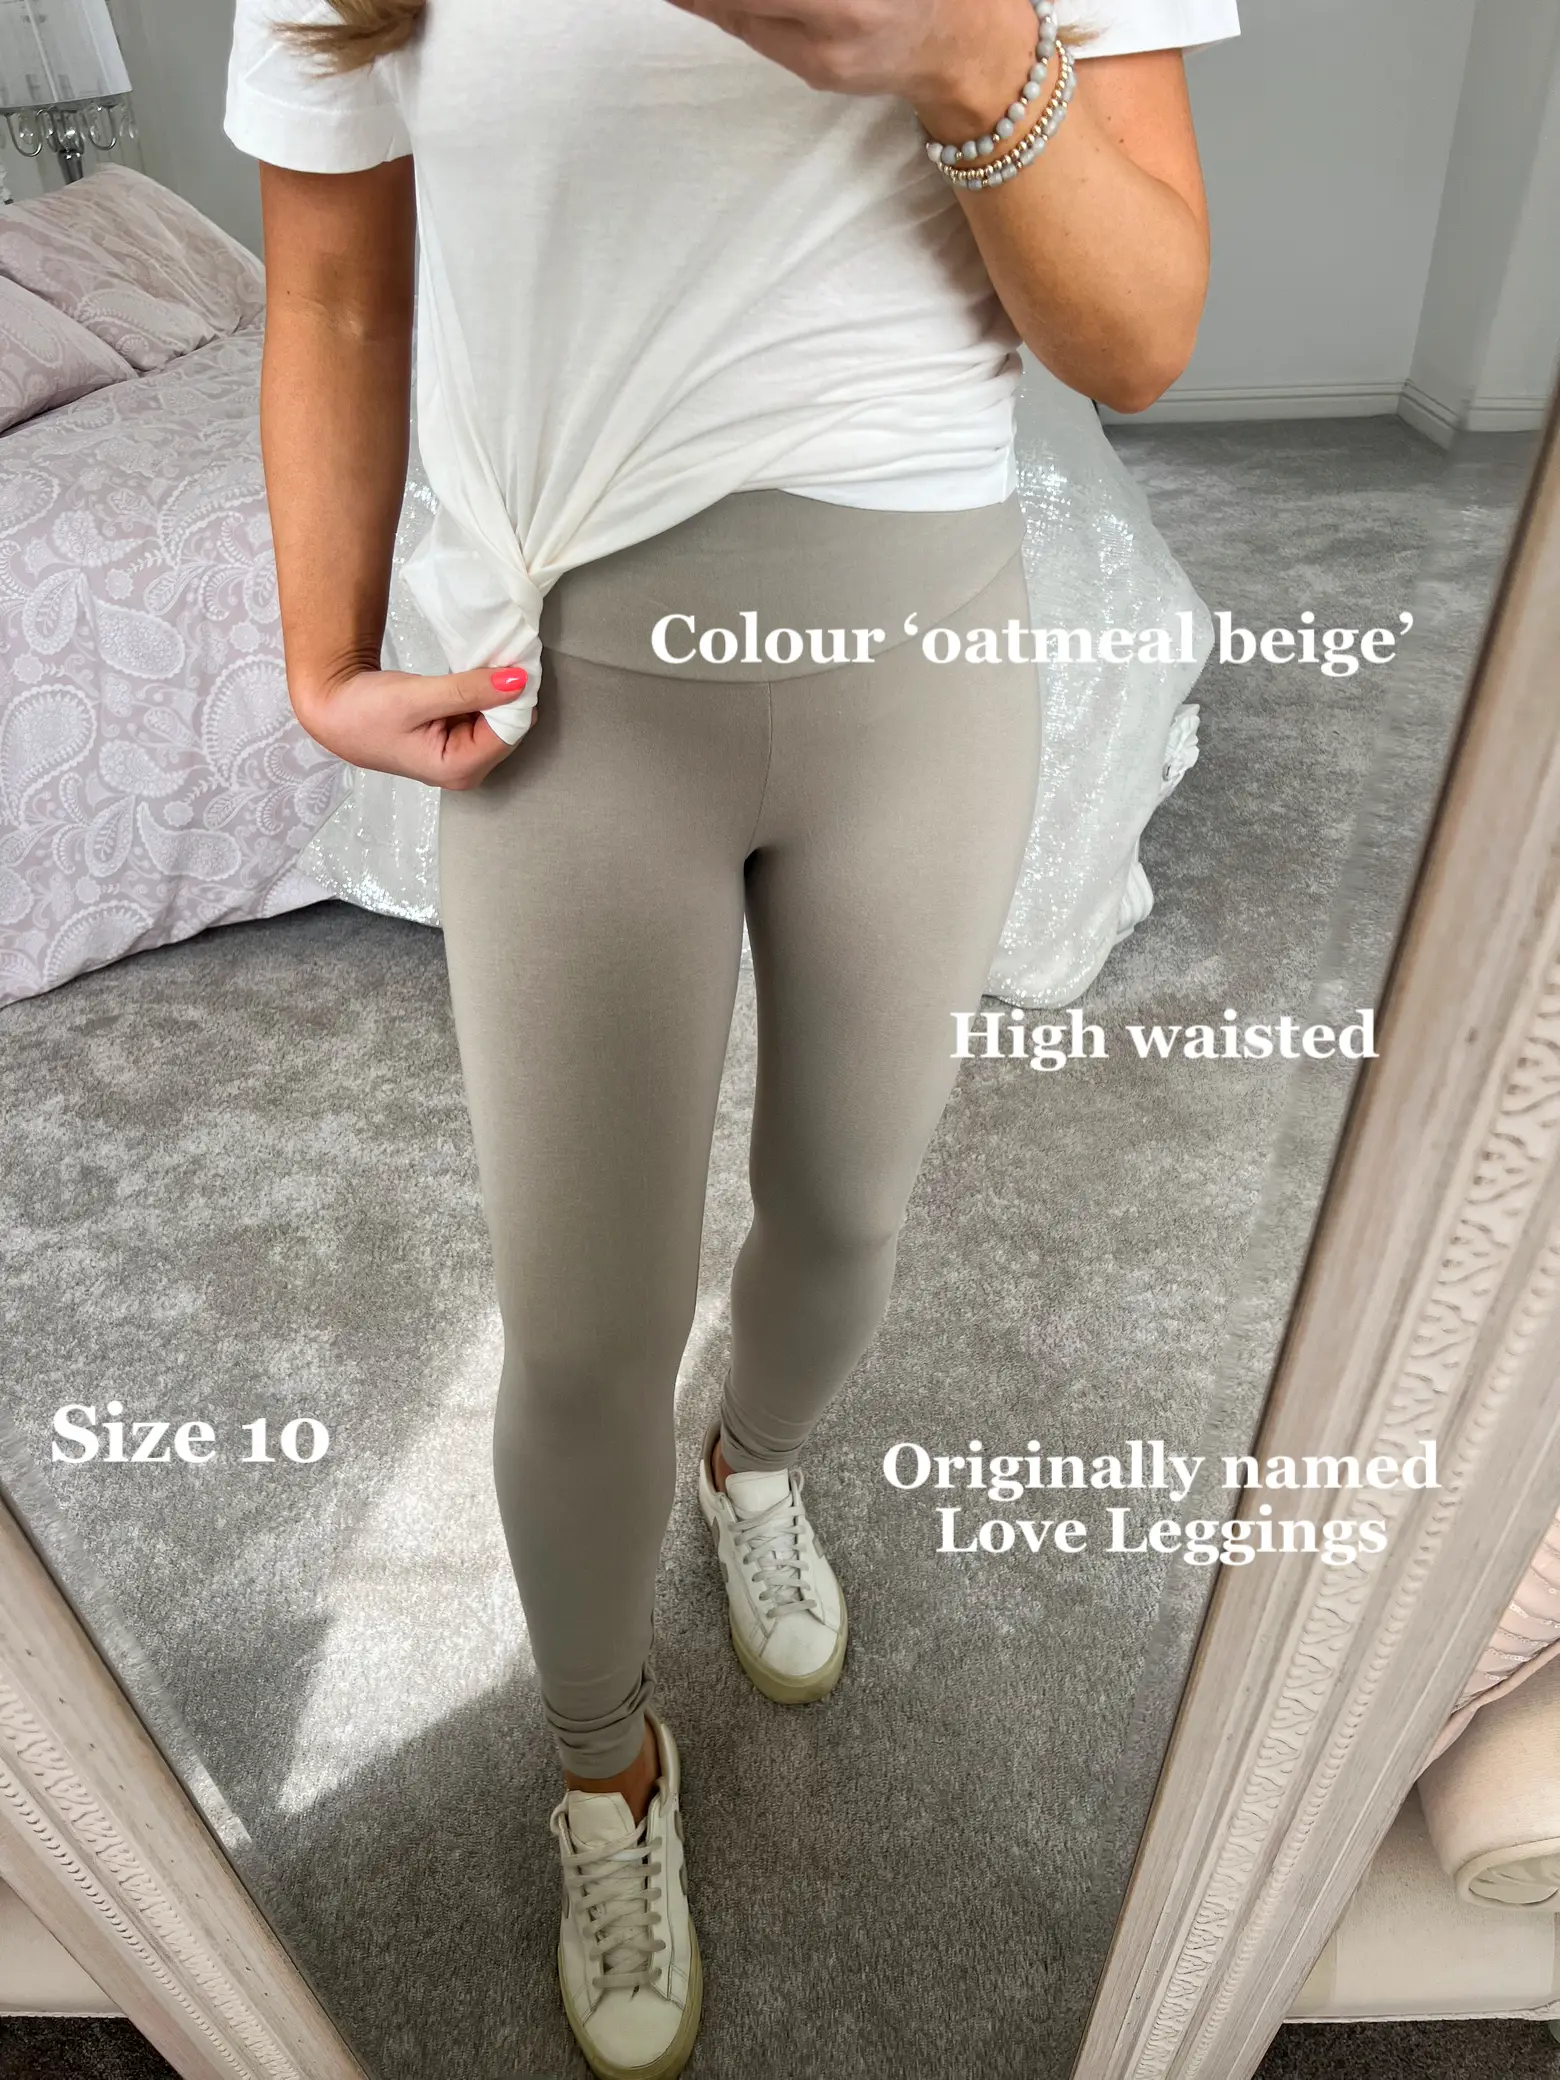 An Honest Aerie Leggings Review: Are They *Really* Worth the Hype?